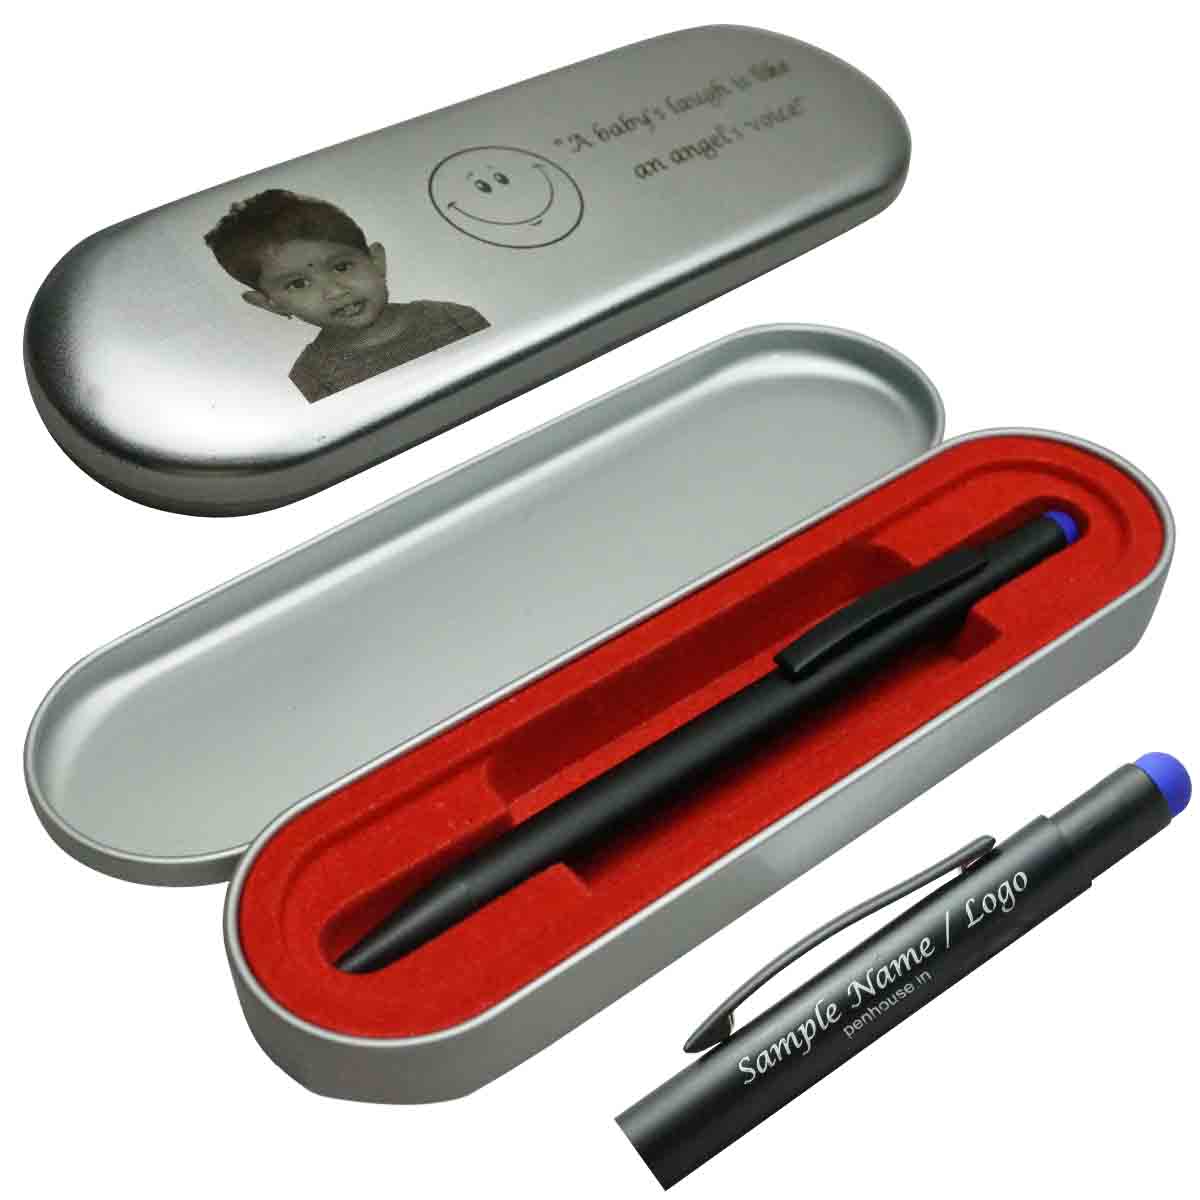 penhouse_M5BS Black Body and Blue Stylus Click Pen with customization Model 18588